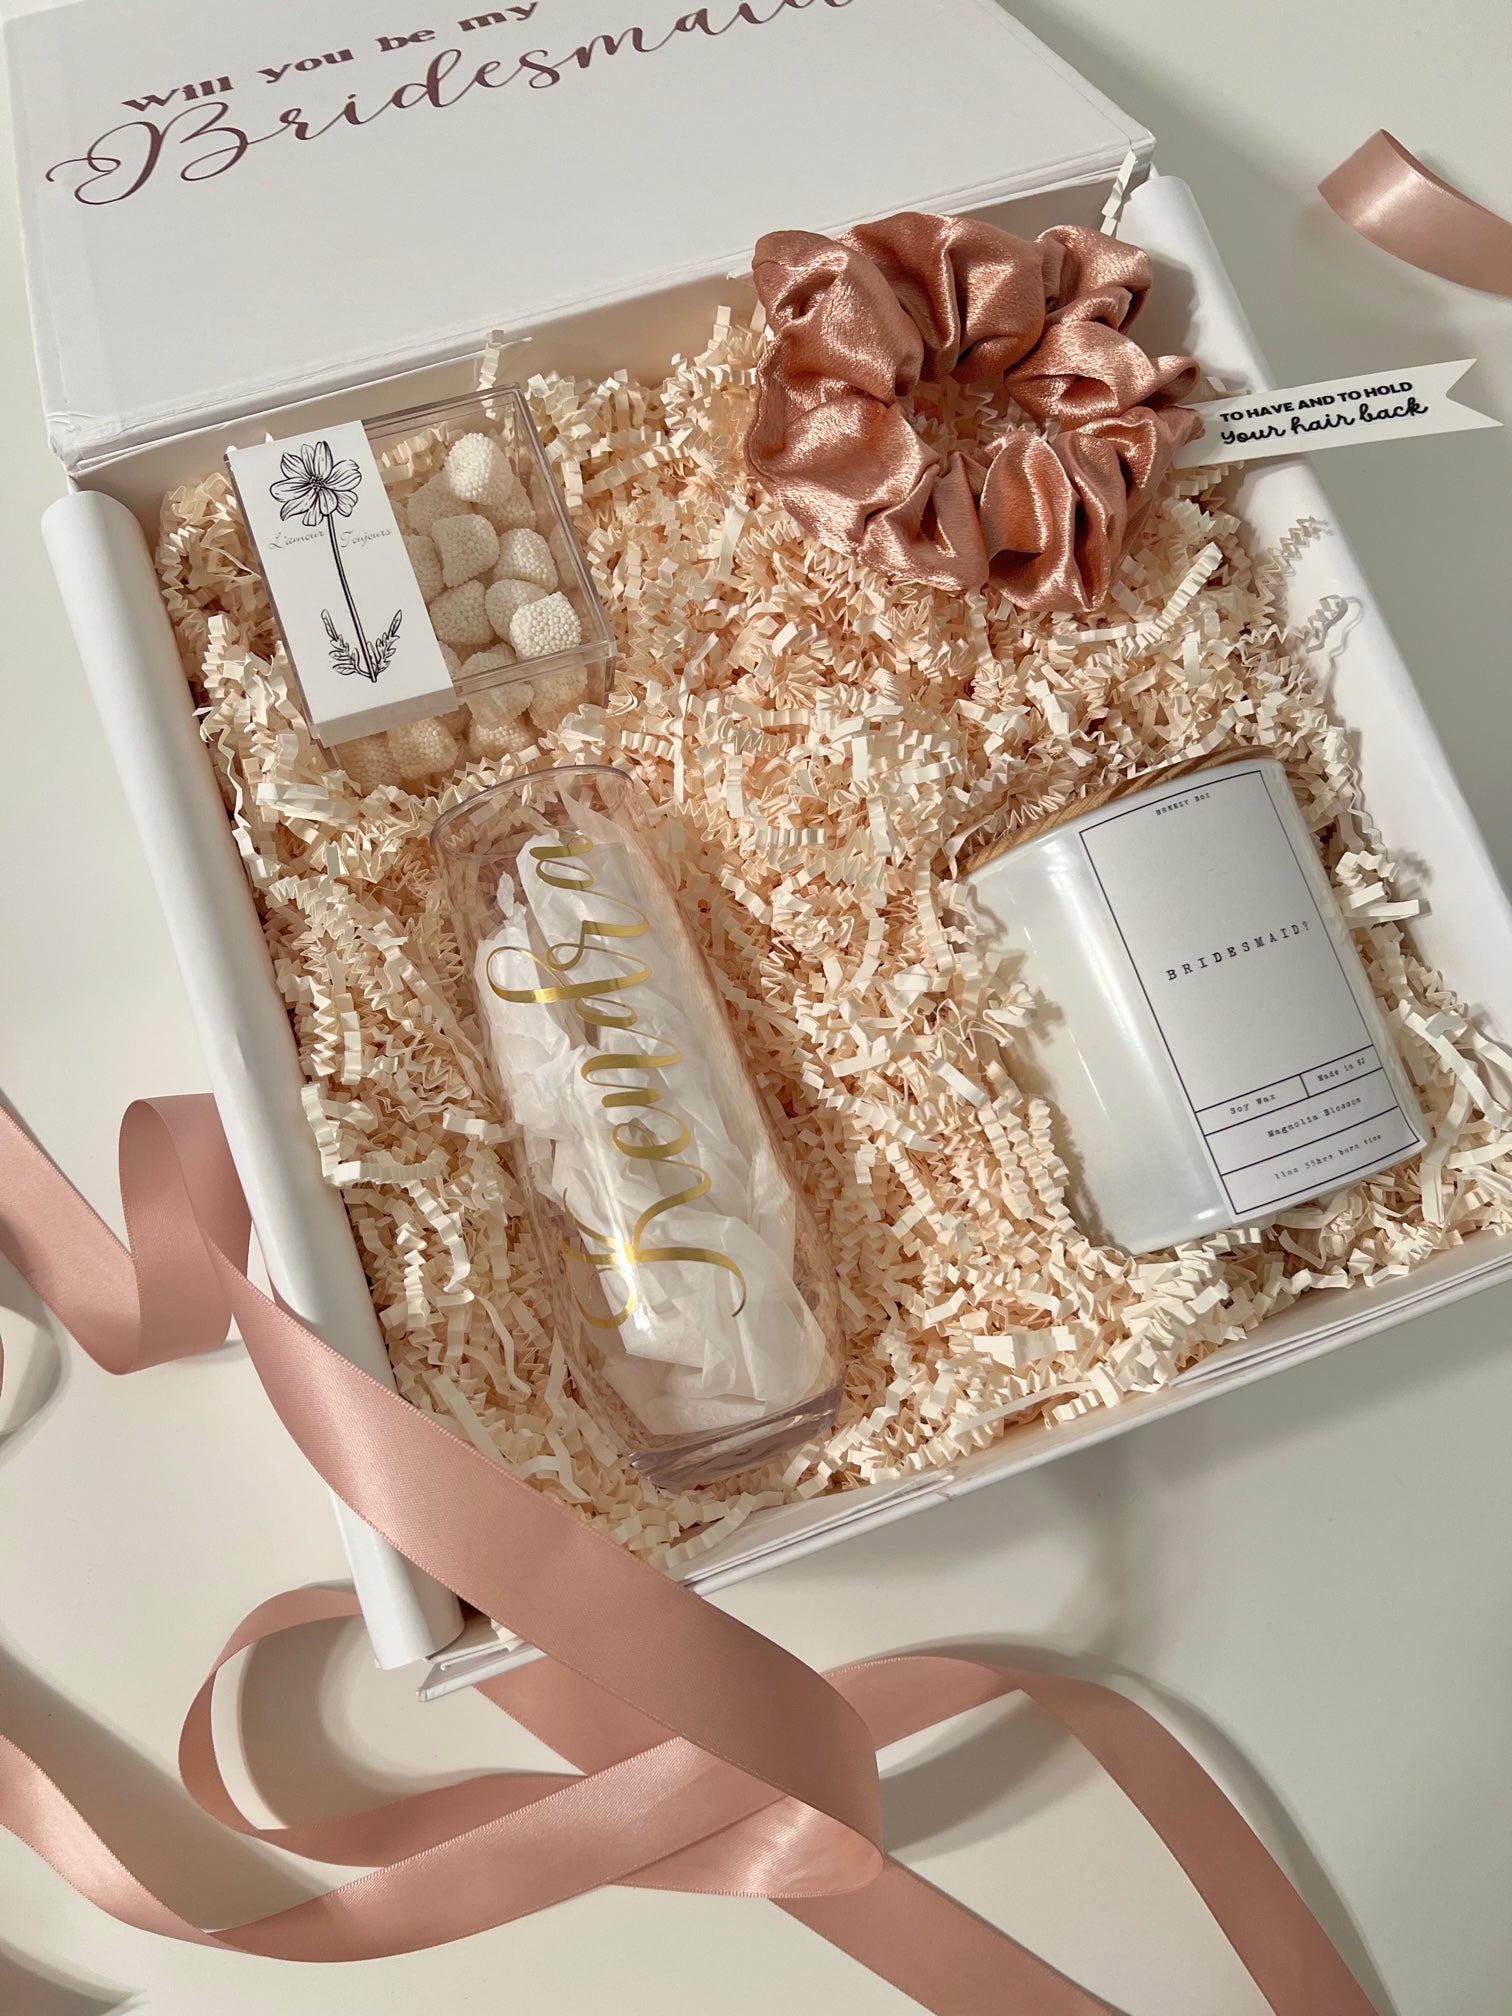 Build a Bridesmaid Box Options Include Robe, Champagne Glass, Necklace,  Proposal Card - Bridesmaid Gifts Boutique